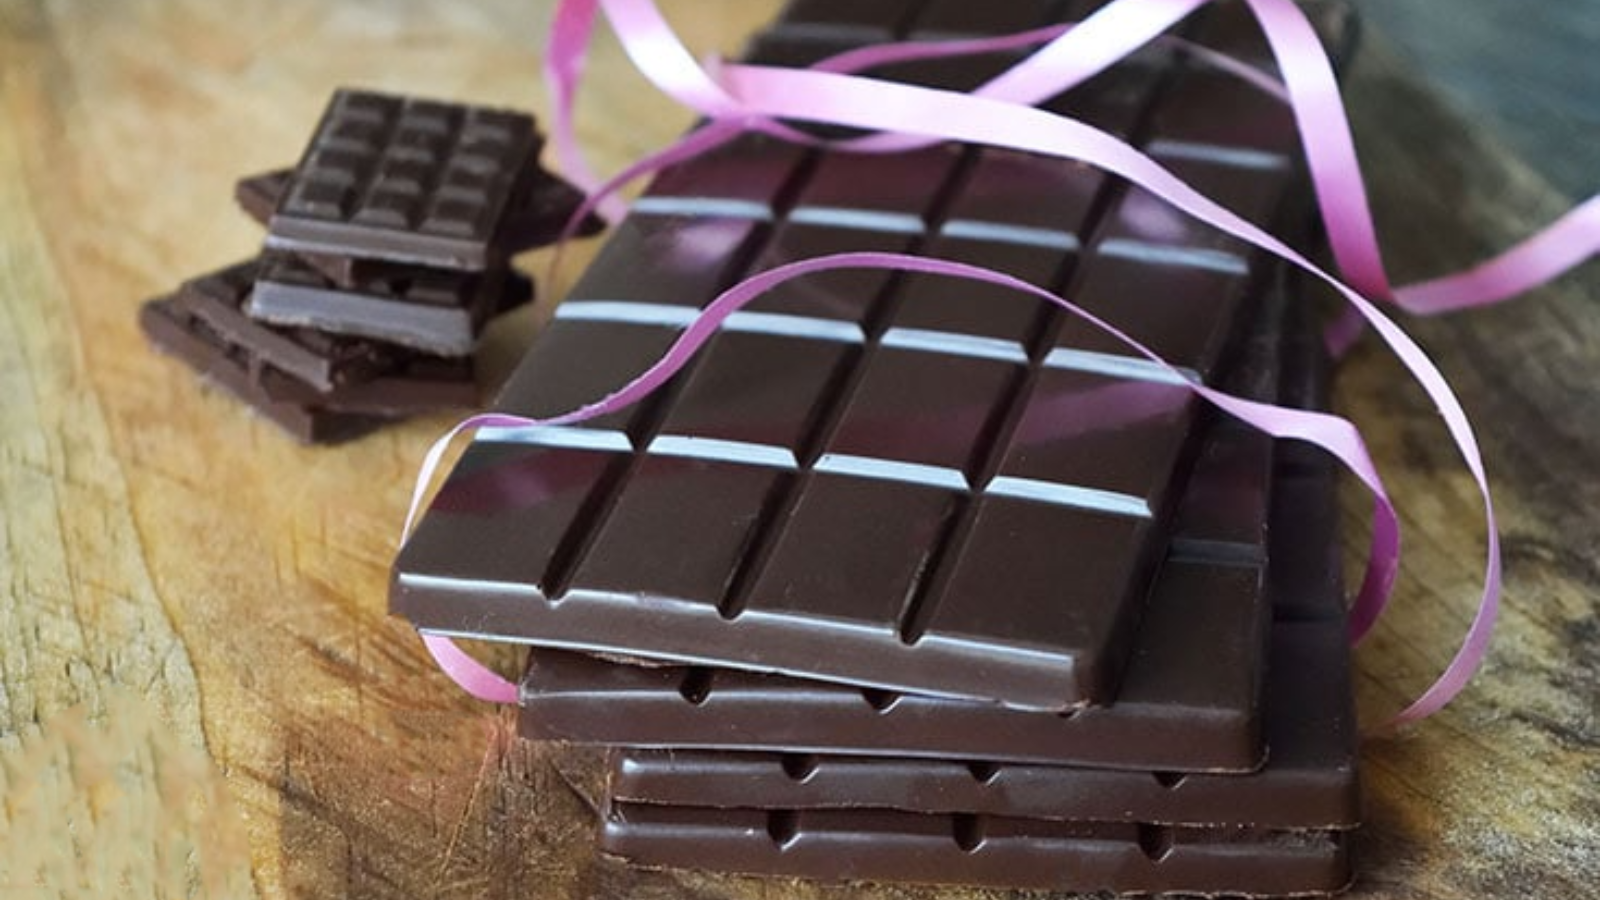 Treat Yourself With These 11 Homemade Candy Recipes